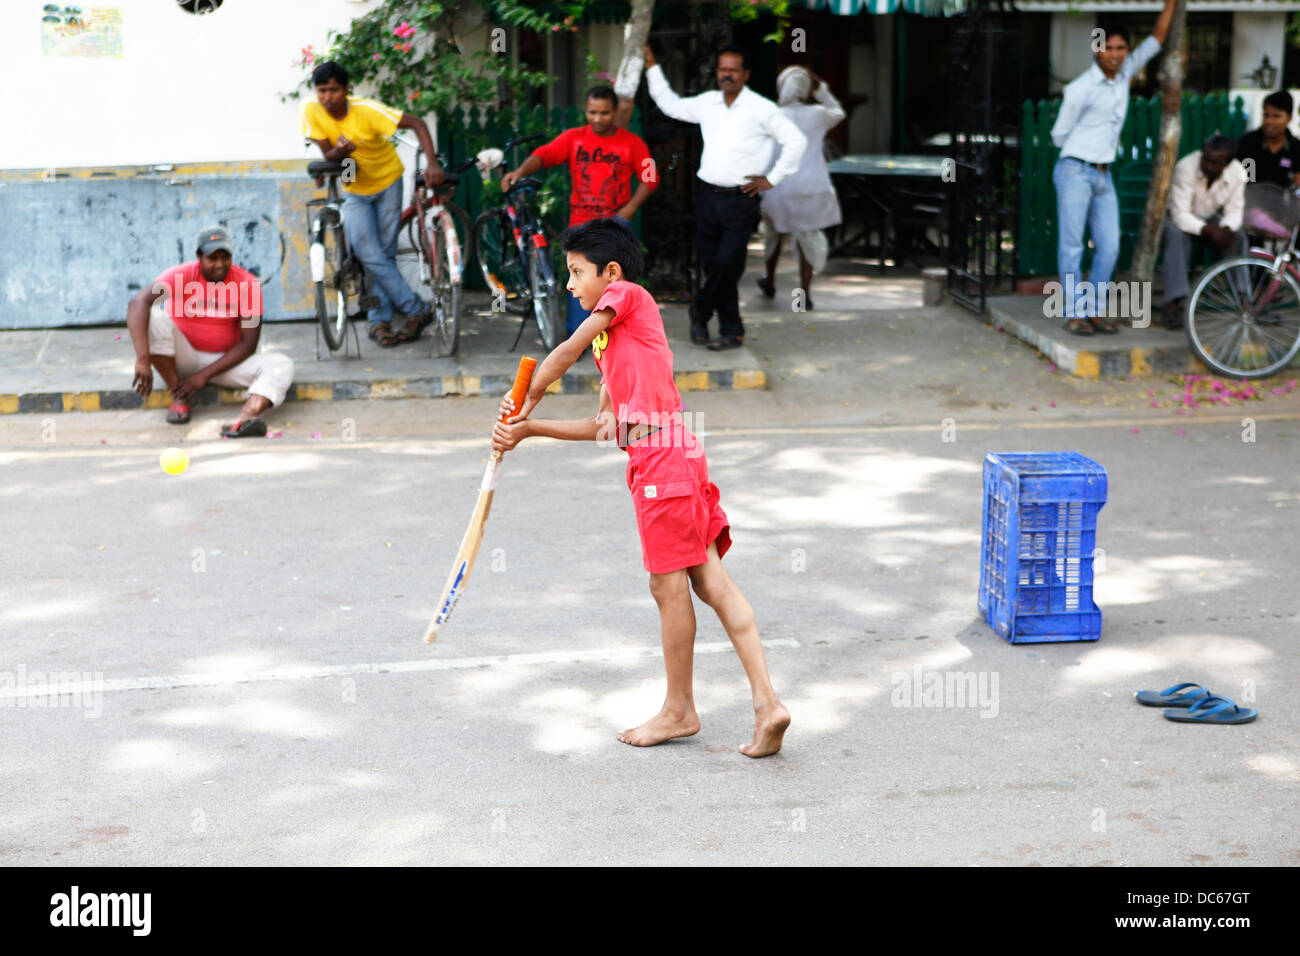 A young Indian boy shows great technique during a game of street cricket in Khajuraho, India. Stock Photo